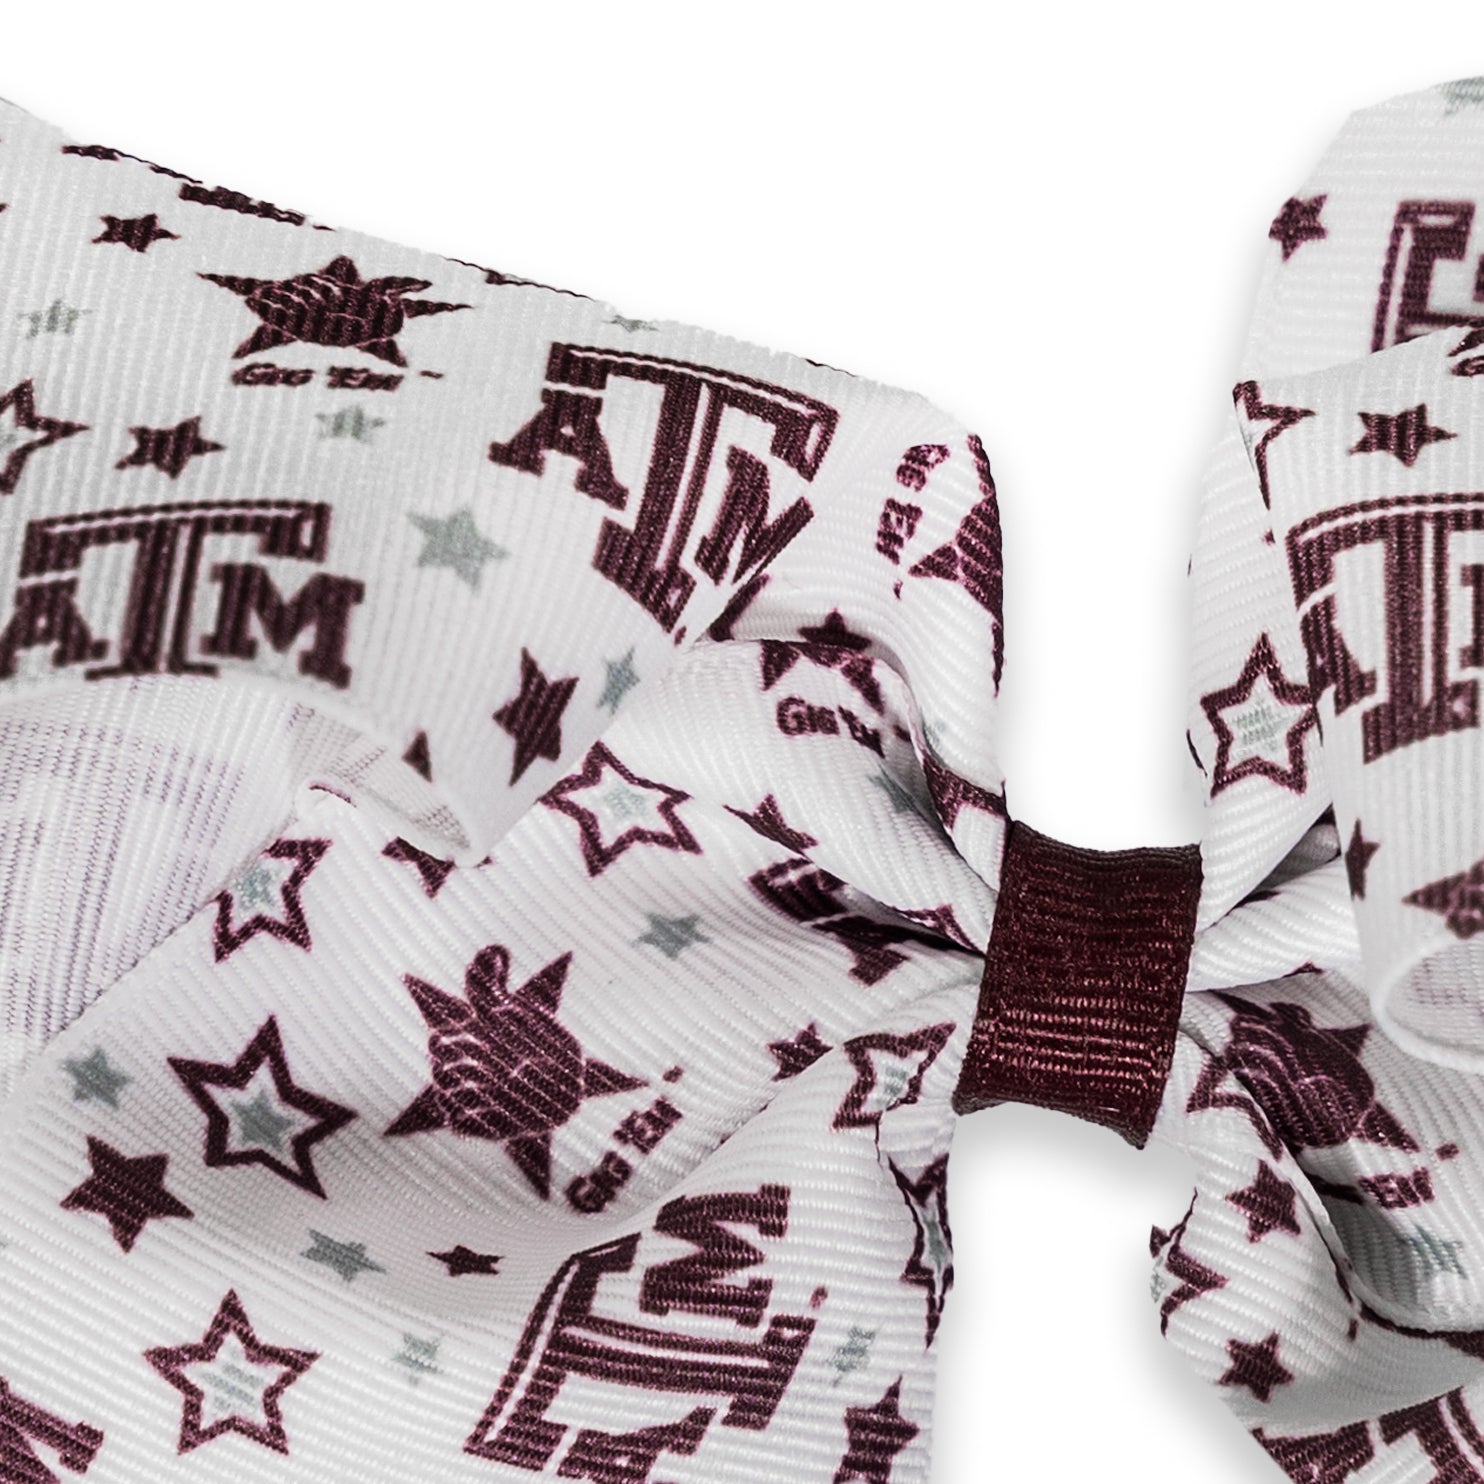 Texas A&M Maroon And White Beveled Atm And Stars Medium Bow